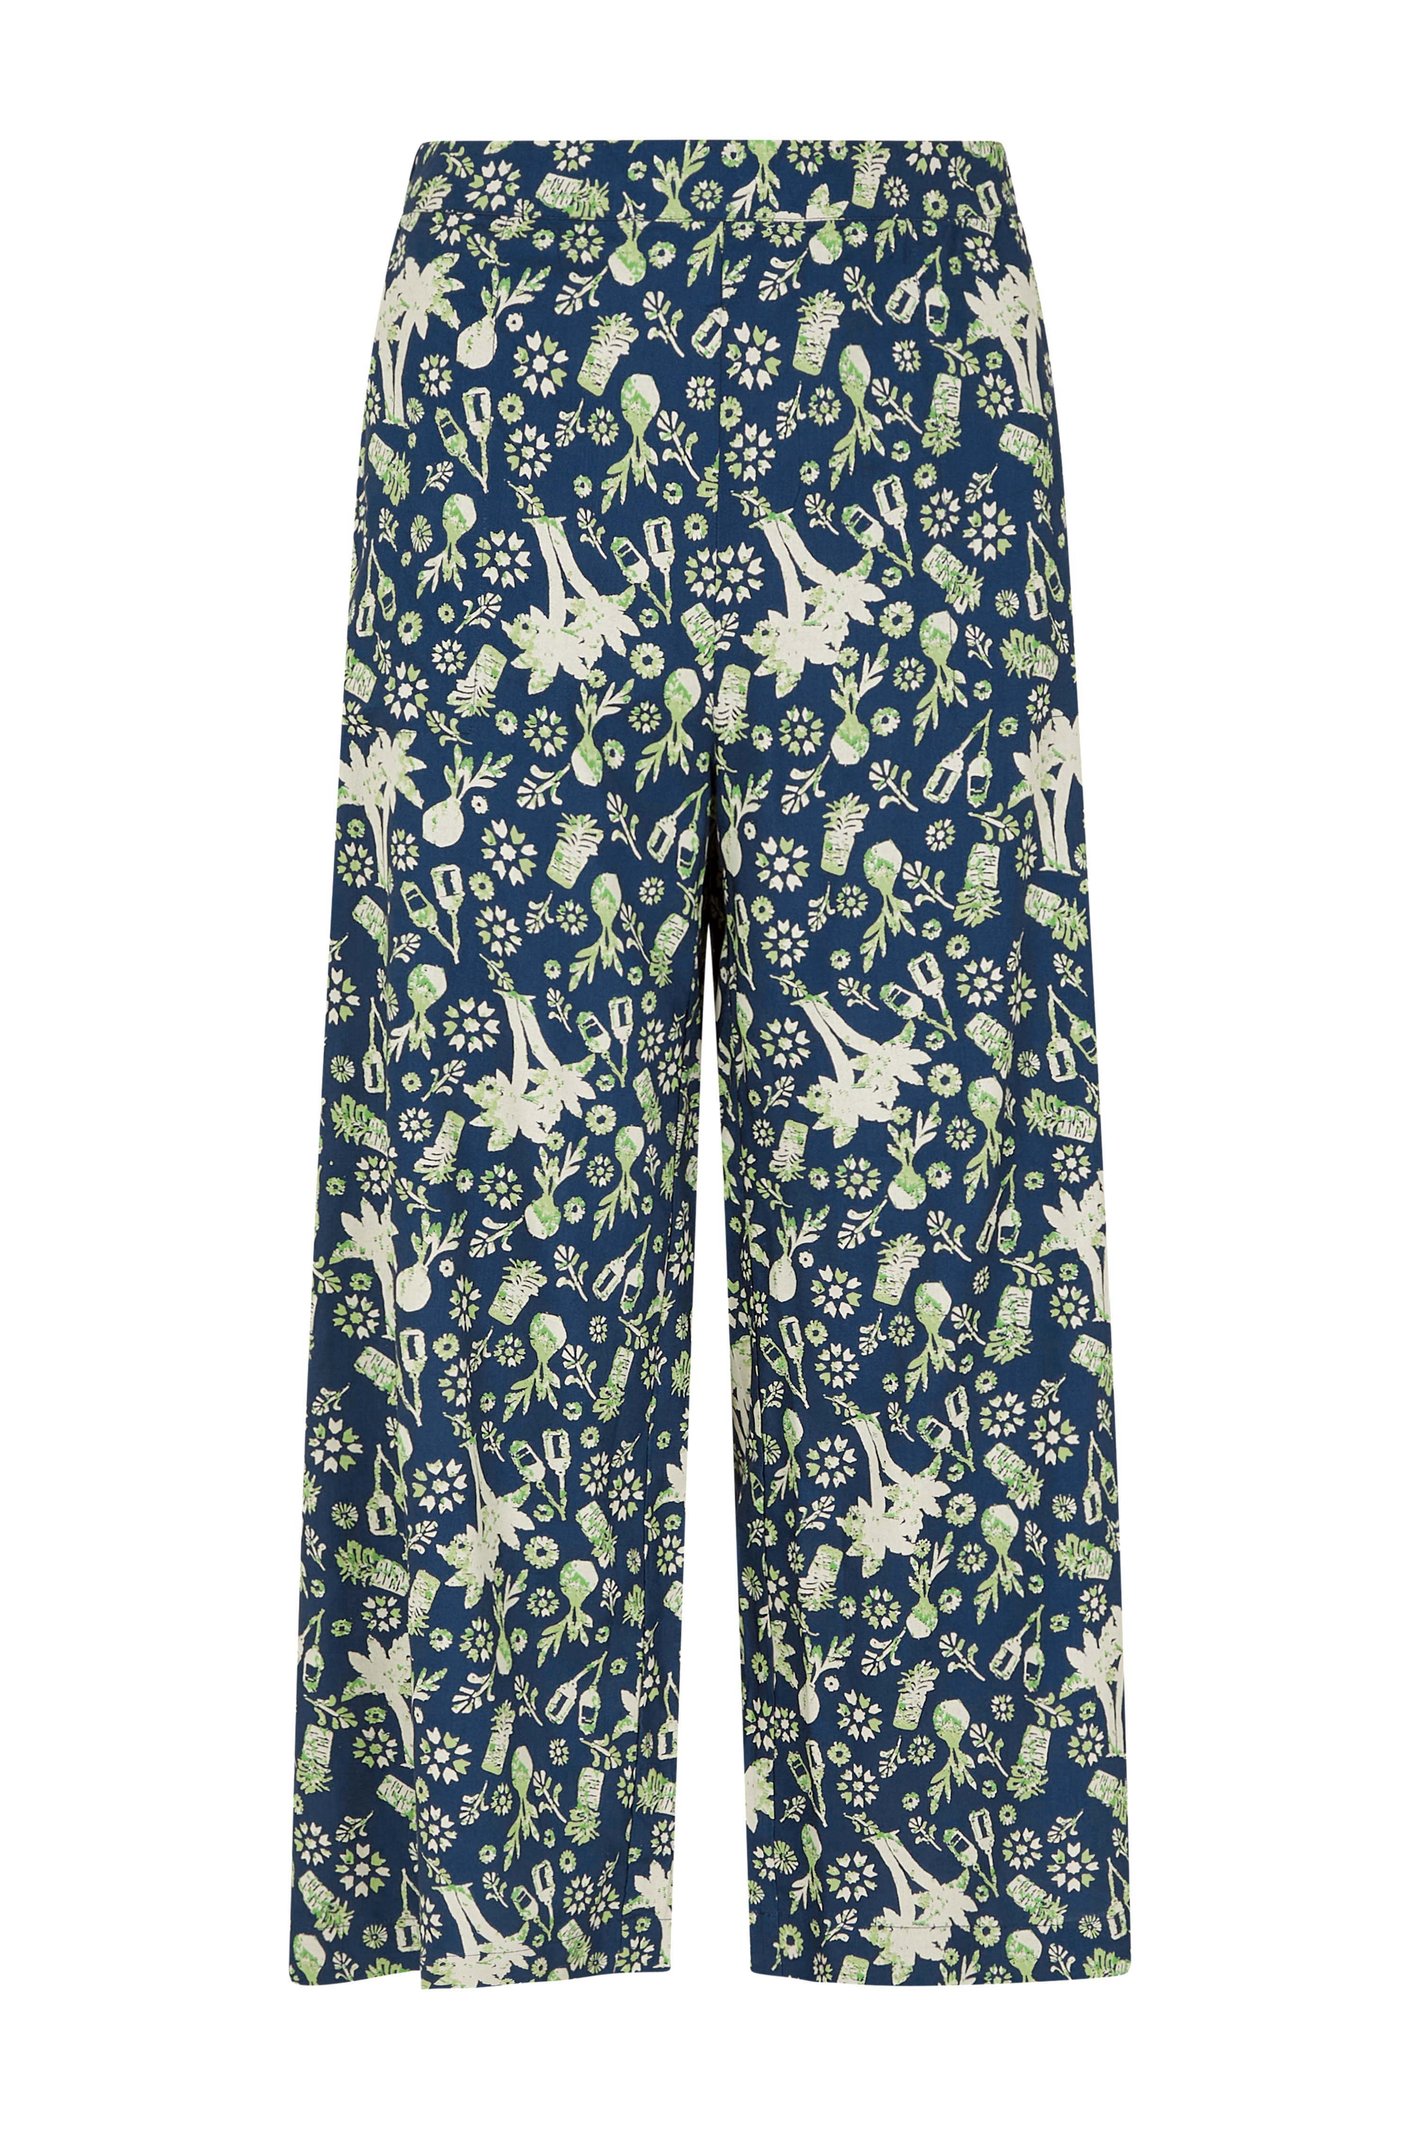 Weird Fish Tresco Eco Viscose Printed Wide Leg Cropped Trousers Ensign Blue Size 10